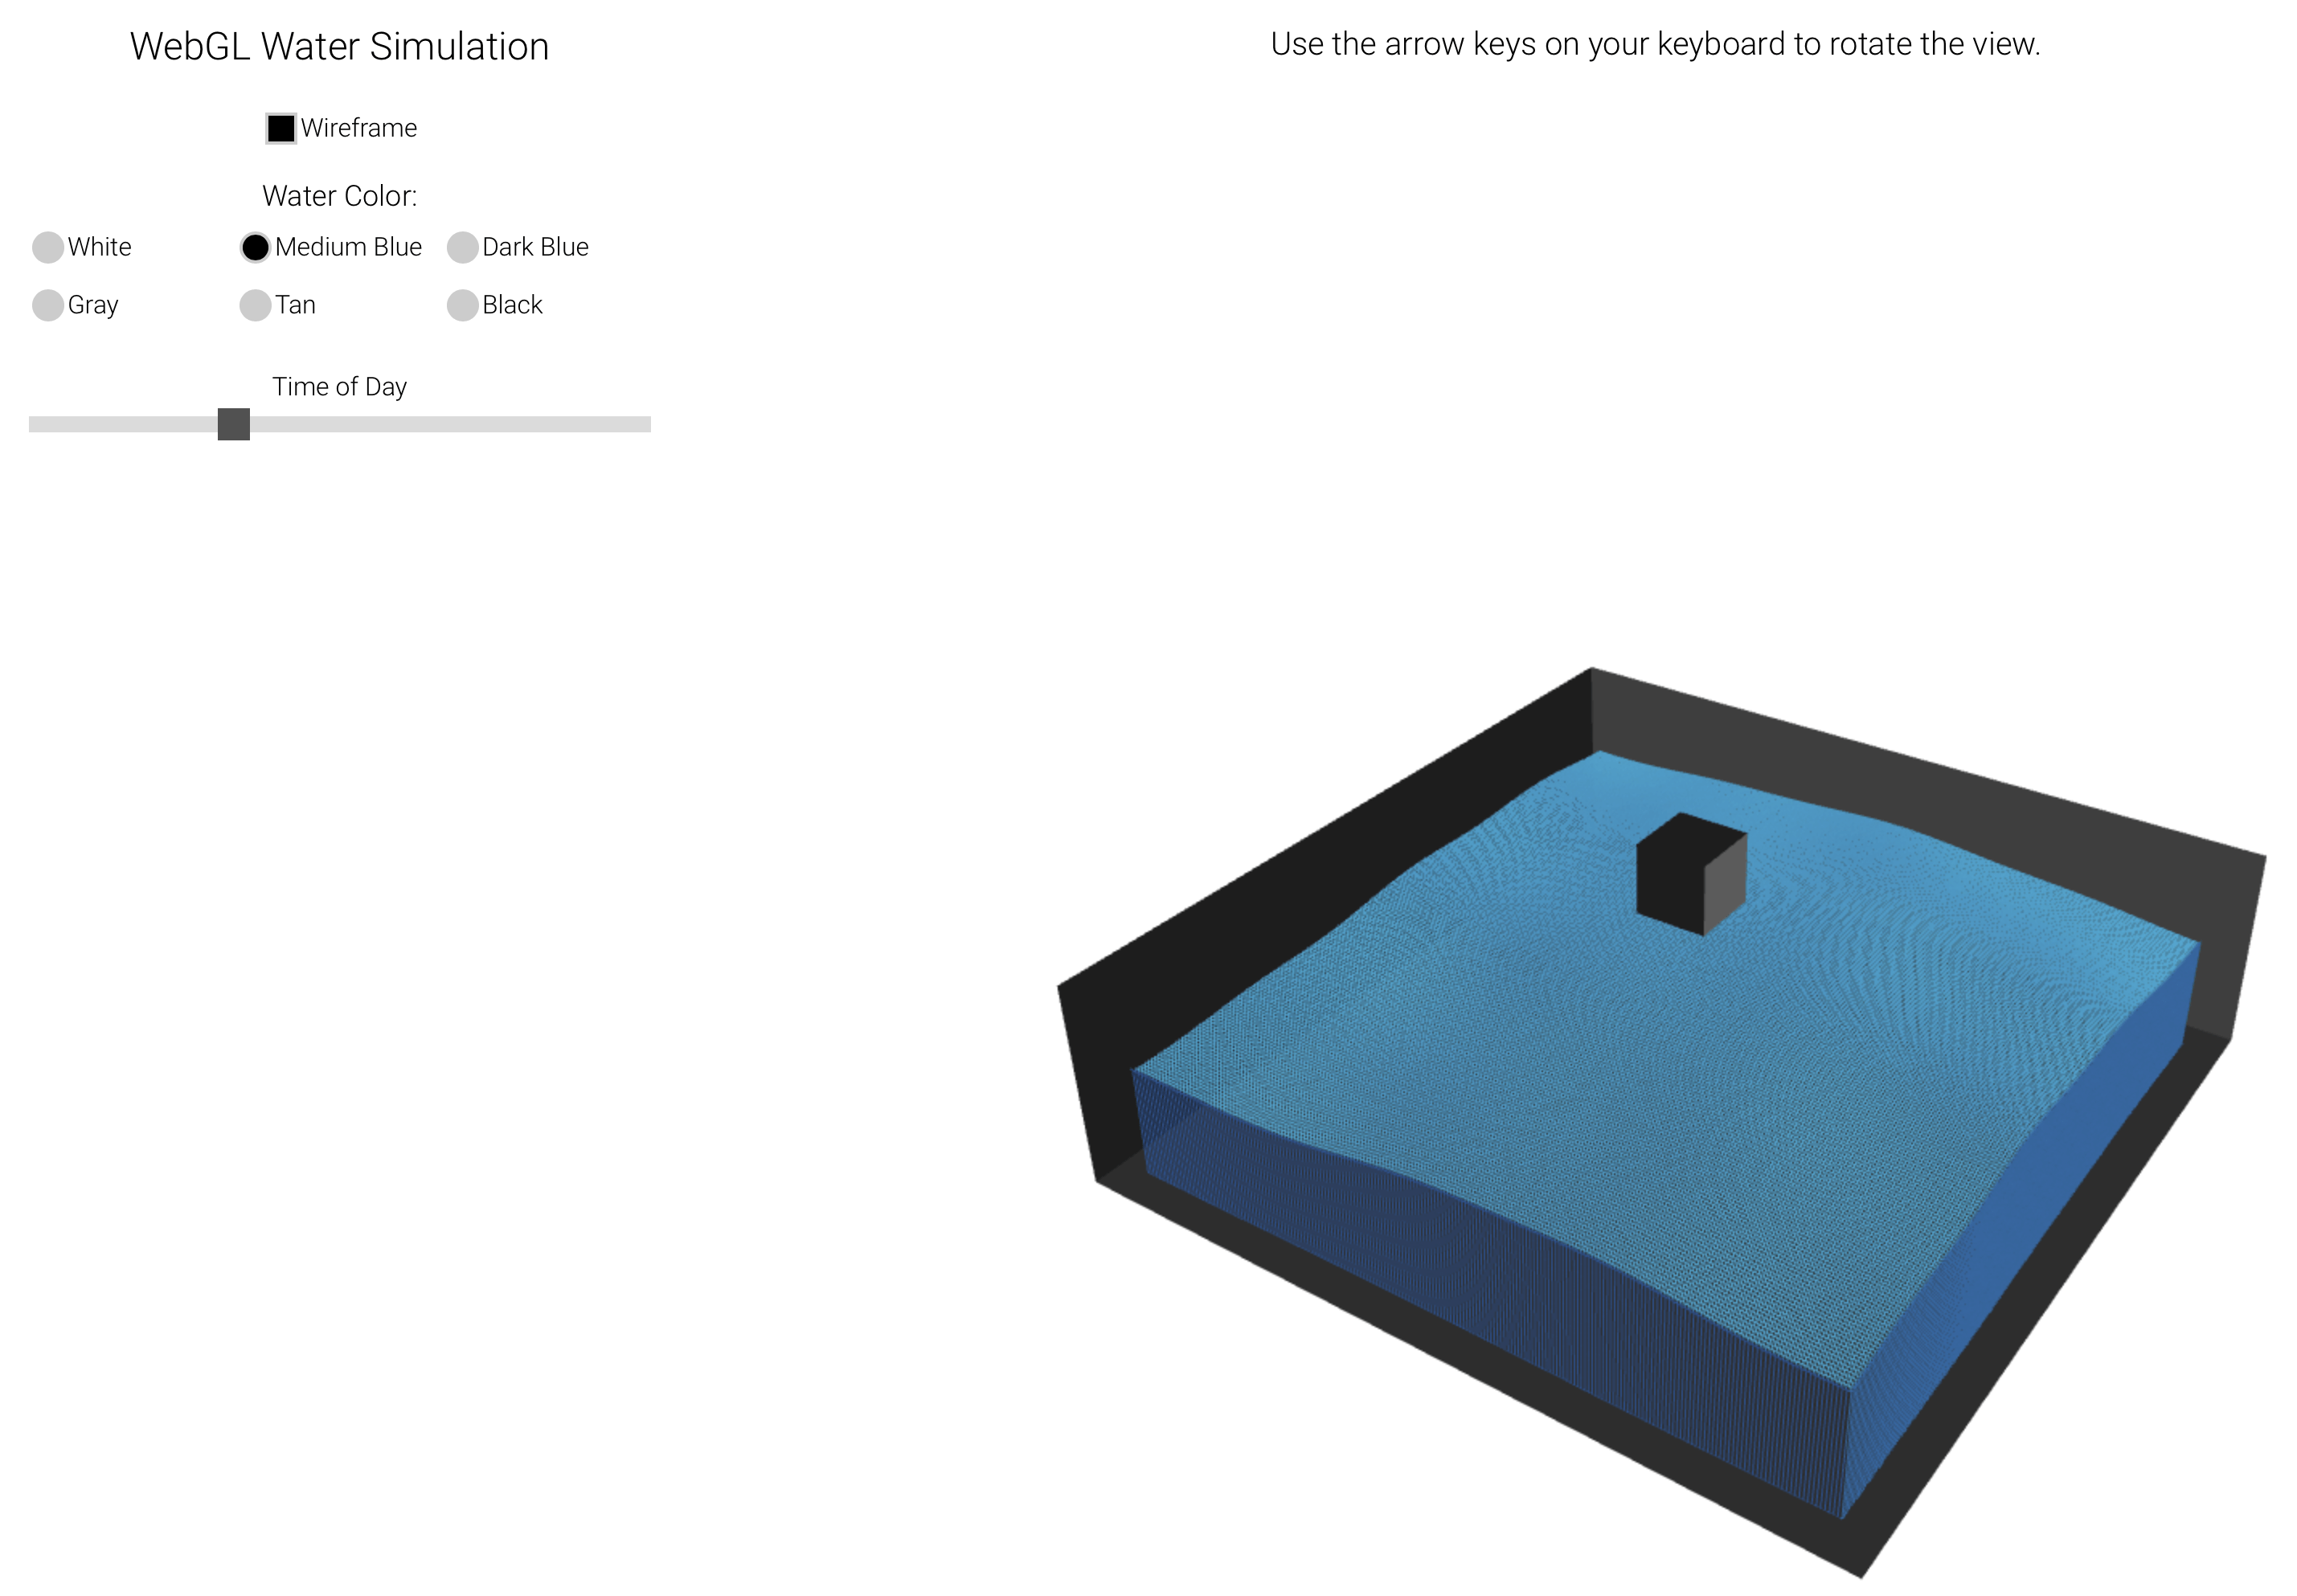 A water simulation with low amplitude and frequency. The lefthand column reads 'WebGL Water Simulation'. Wireframe checkbox, checked. Water Color: with options White, Medium Blue (selected), Dark Blue, Gray, Tan, Black. Time of day slider, 35%. The top text reads 'Use the arrow keys on your keyboard to rotate the view.' The right view shows a black box hovering over a blue distorted rectangular prism contained within a black box with 2 sides and the top missing.